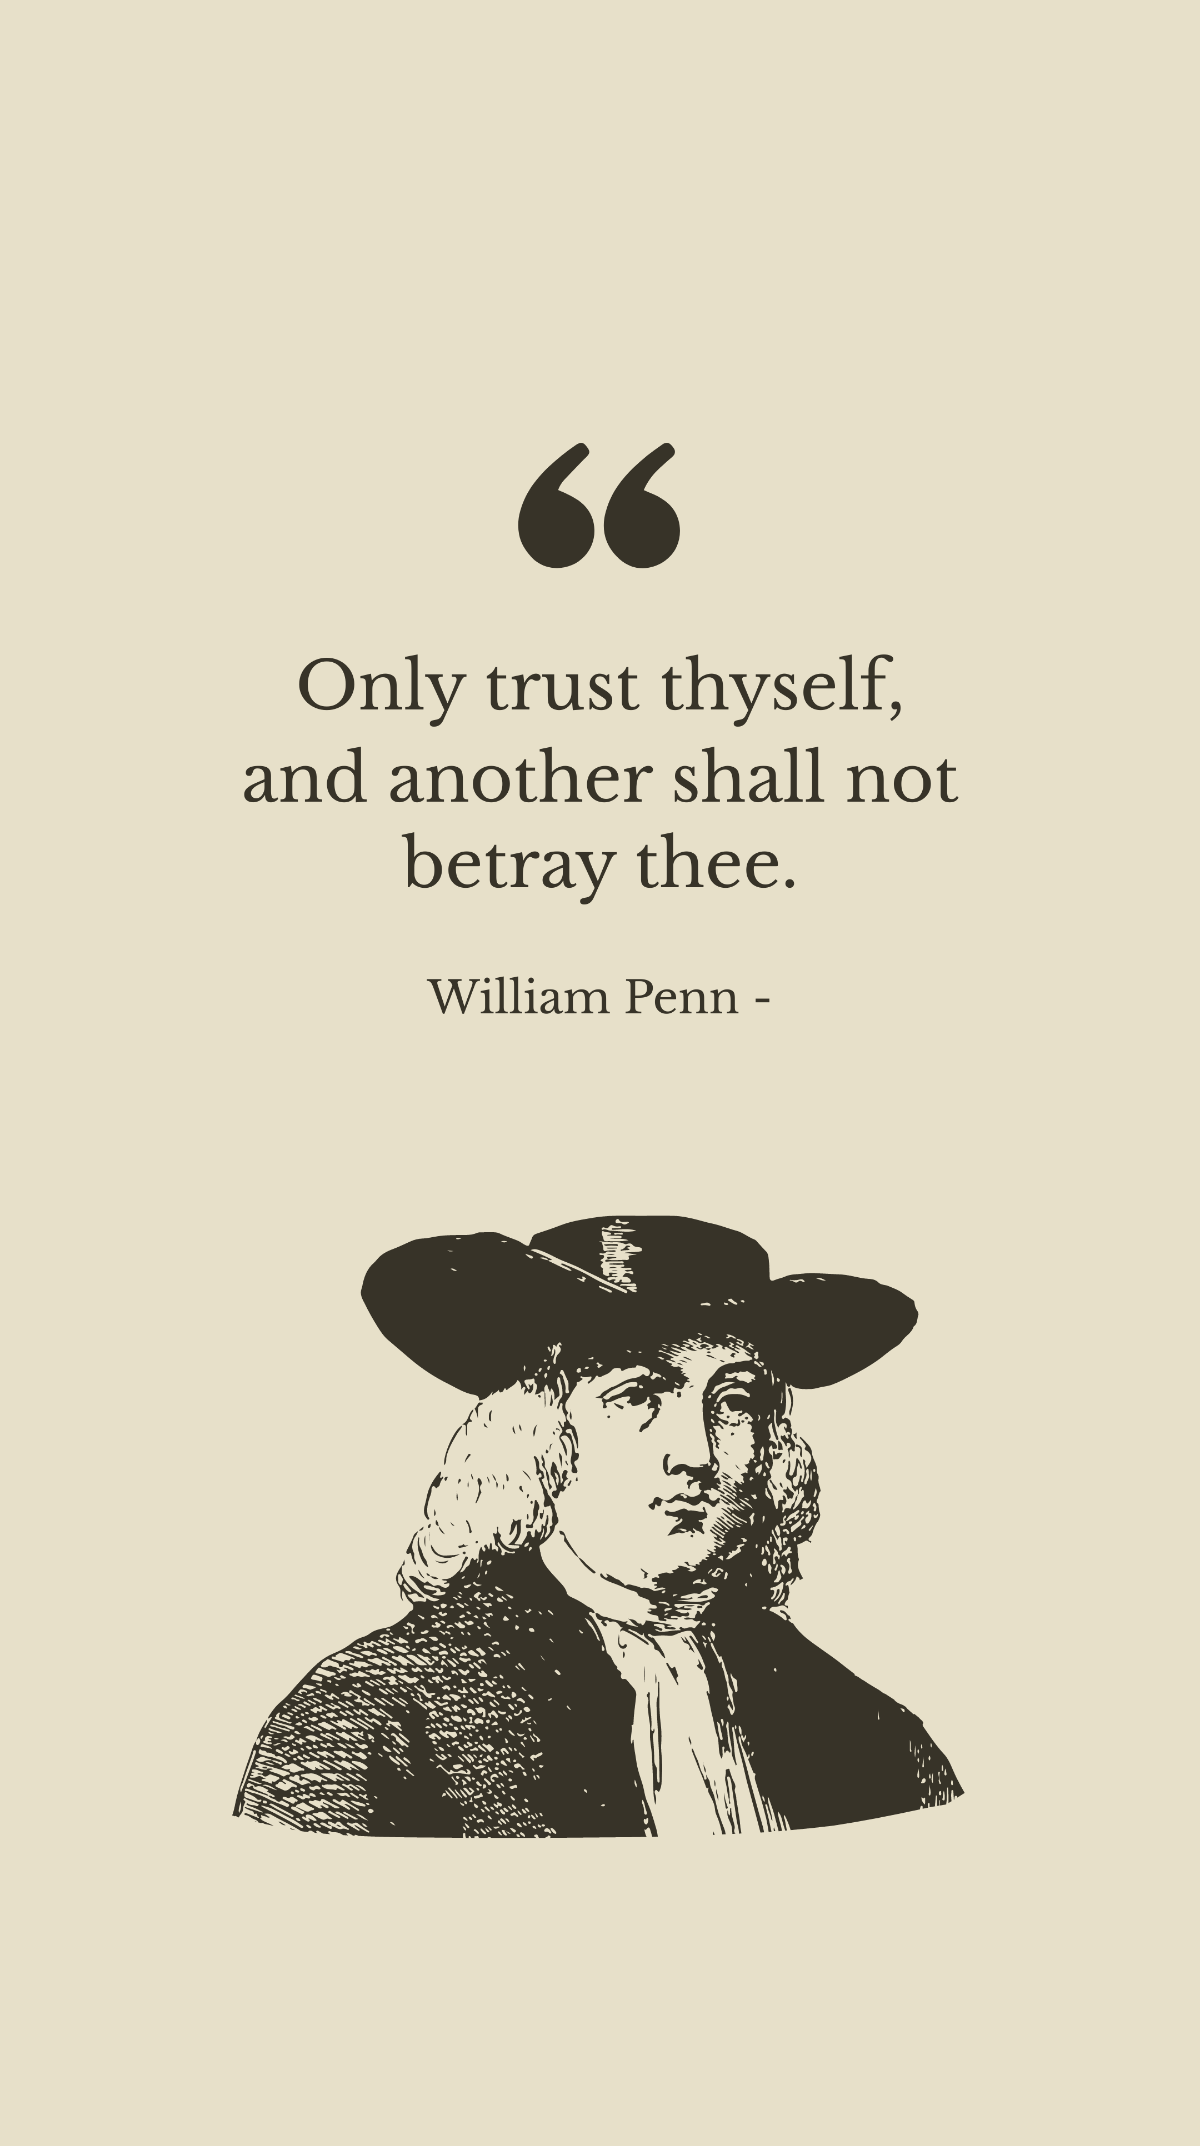 William Penn - Only trust thyself, and another shall not betray thee.